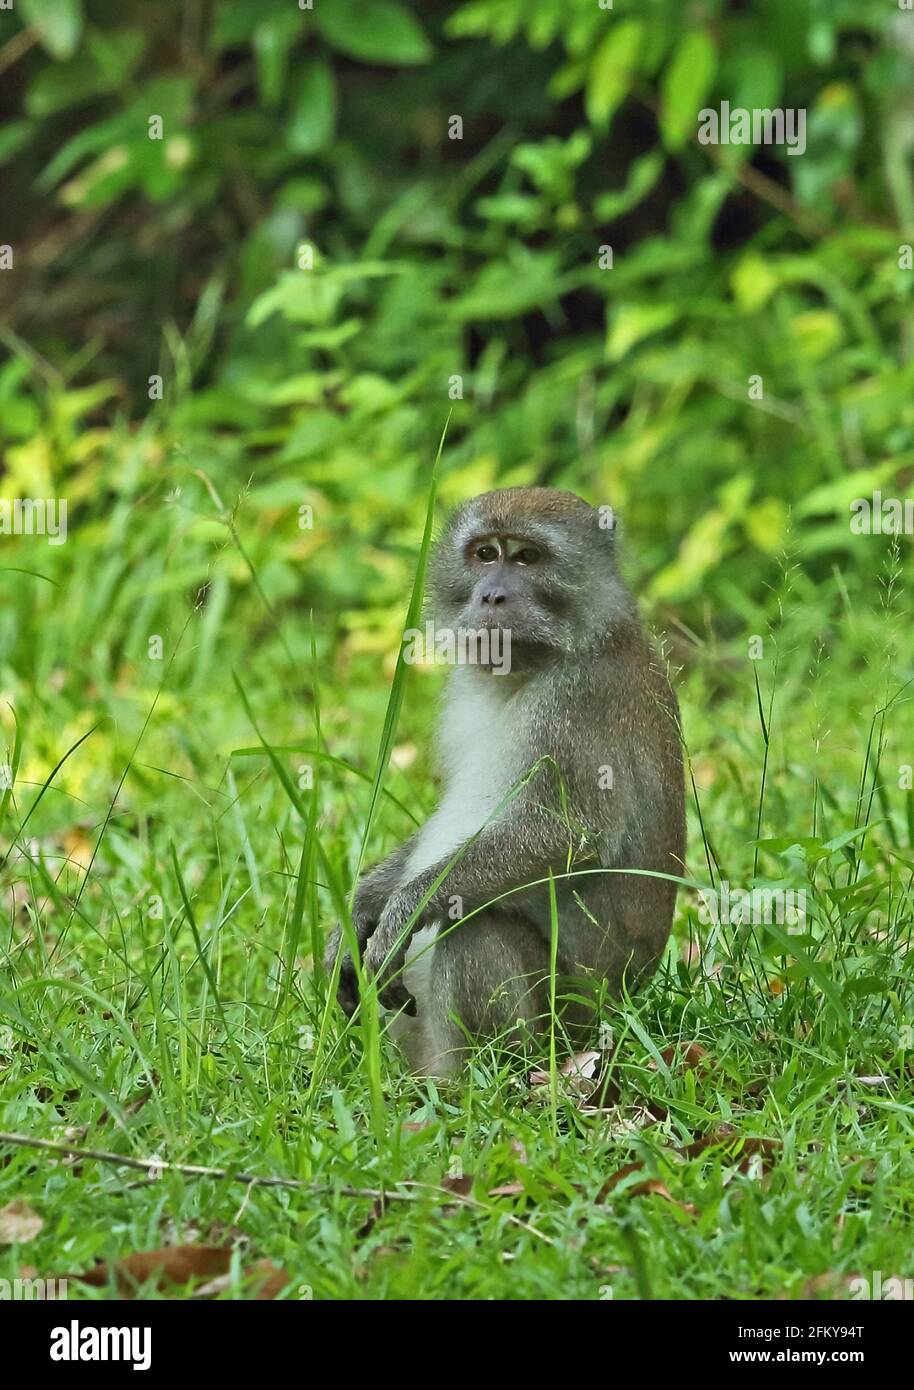 Long-tailed Macaque (Macaca fascicularis fascicularis) adult sitting in grassy clearing  Way Kambas NP, Sumatra, Indonesia         June Stock Photo